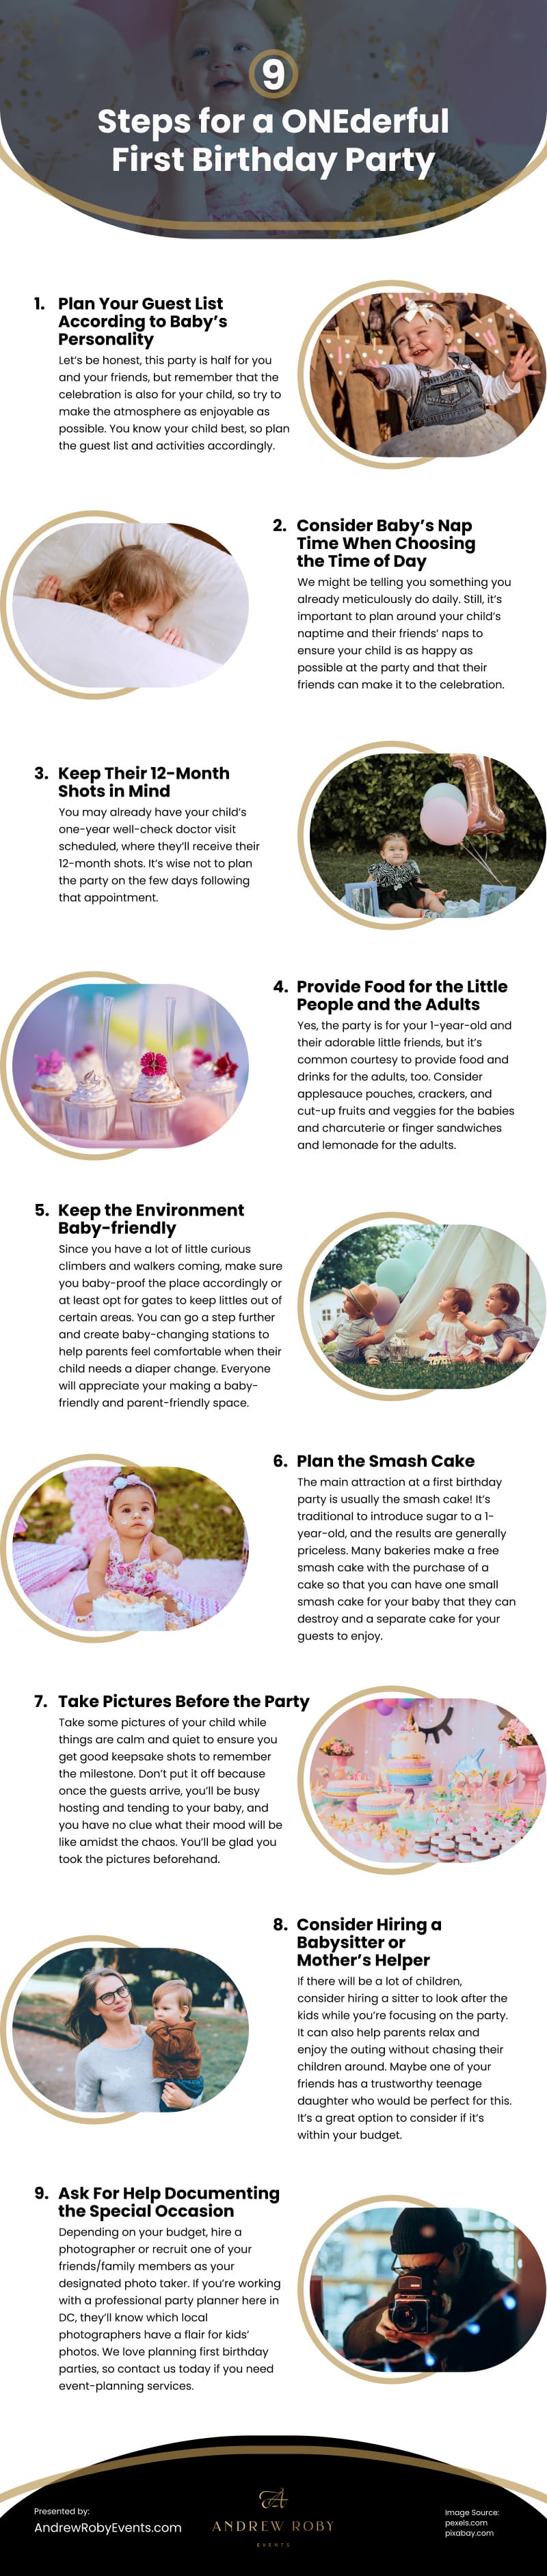 9 Steps for a ONEderful First Birthday Party Infographic